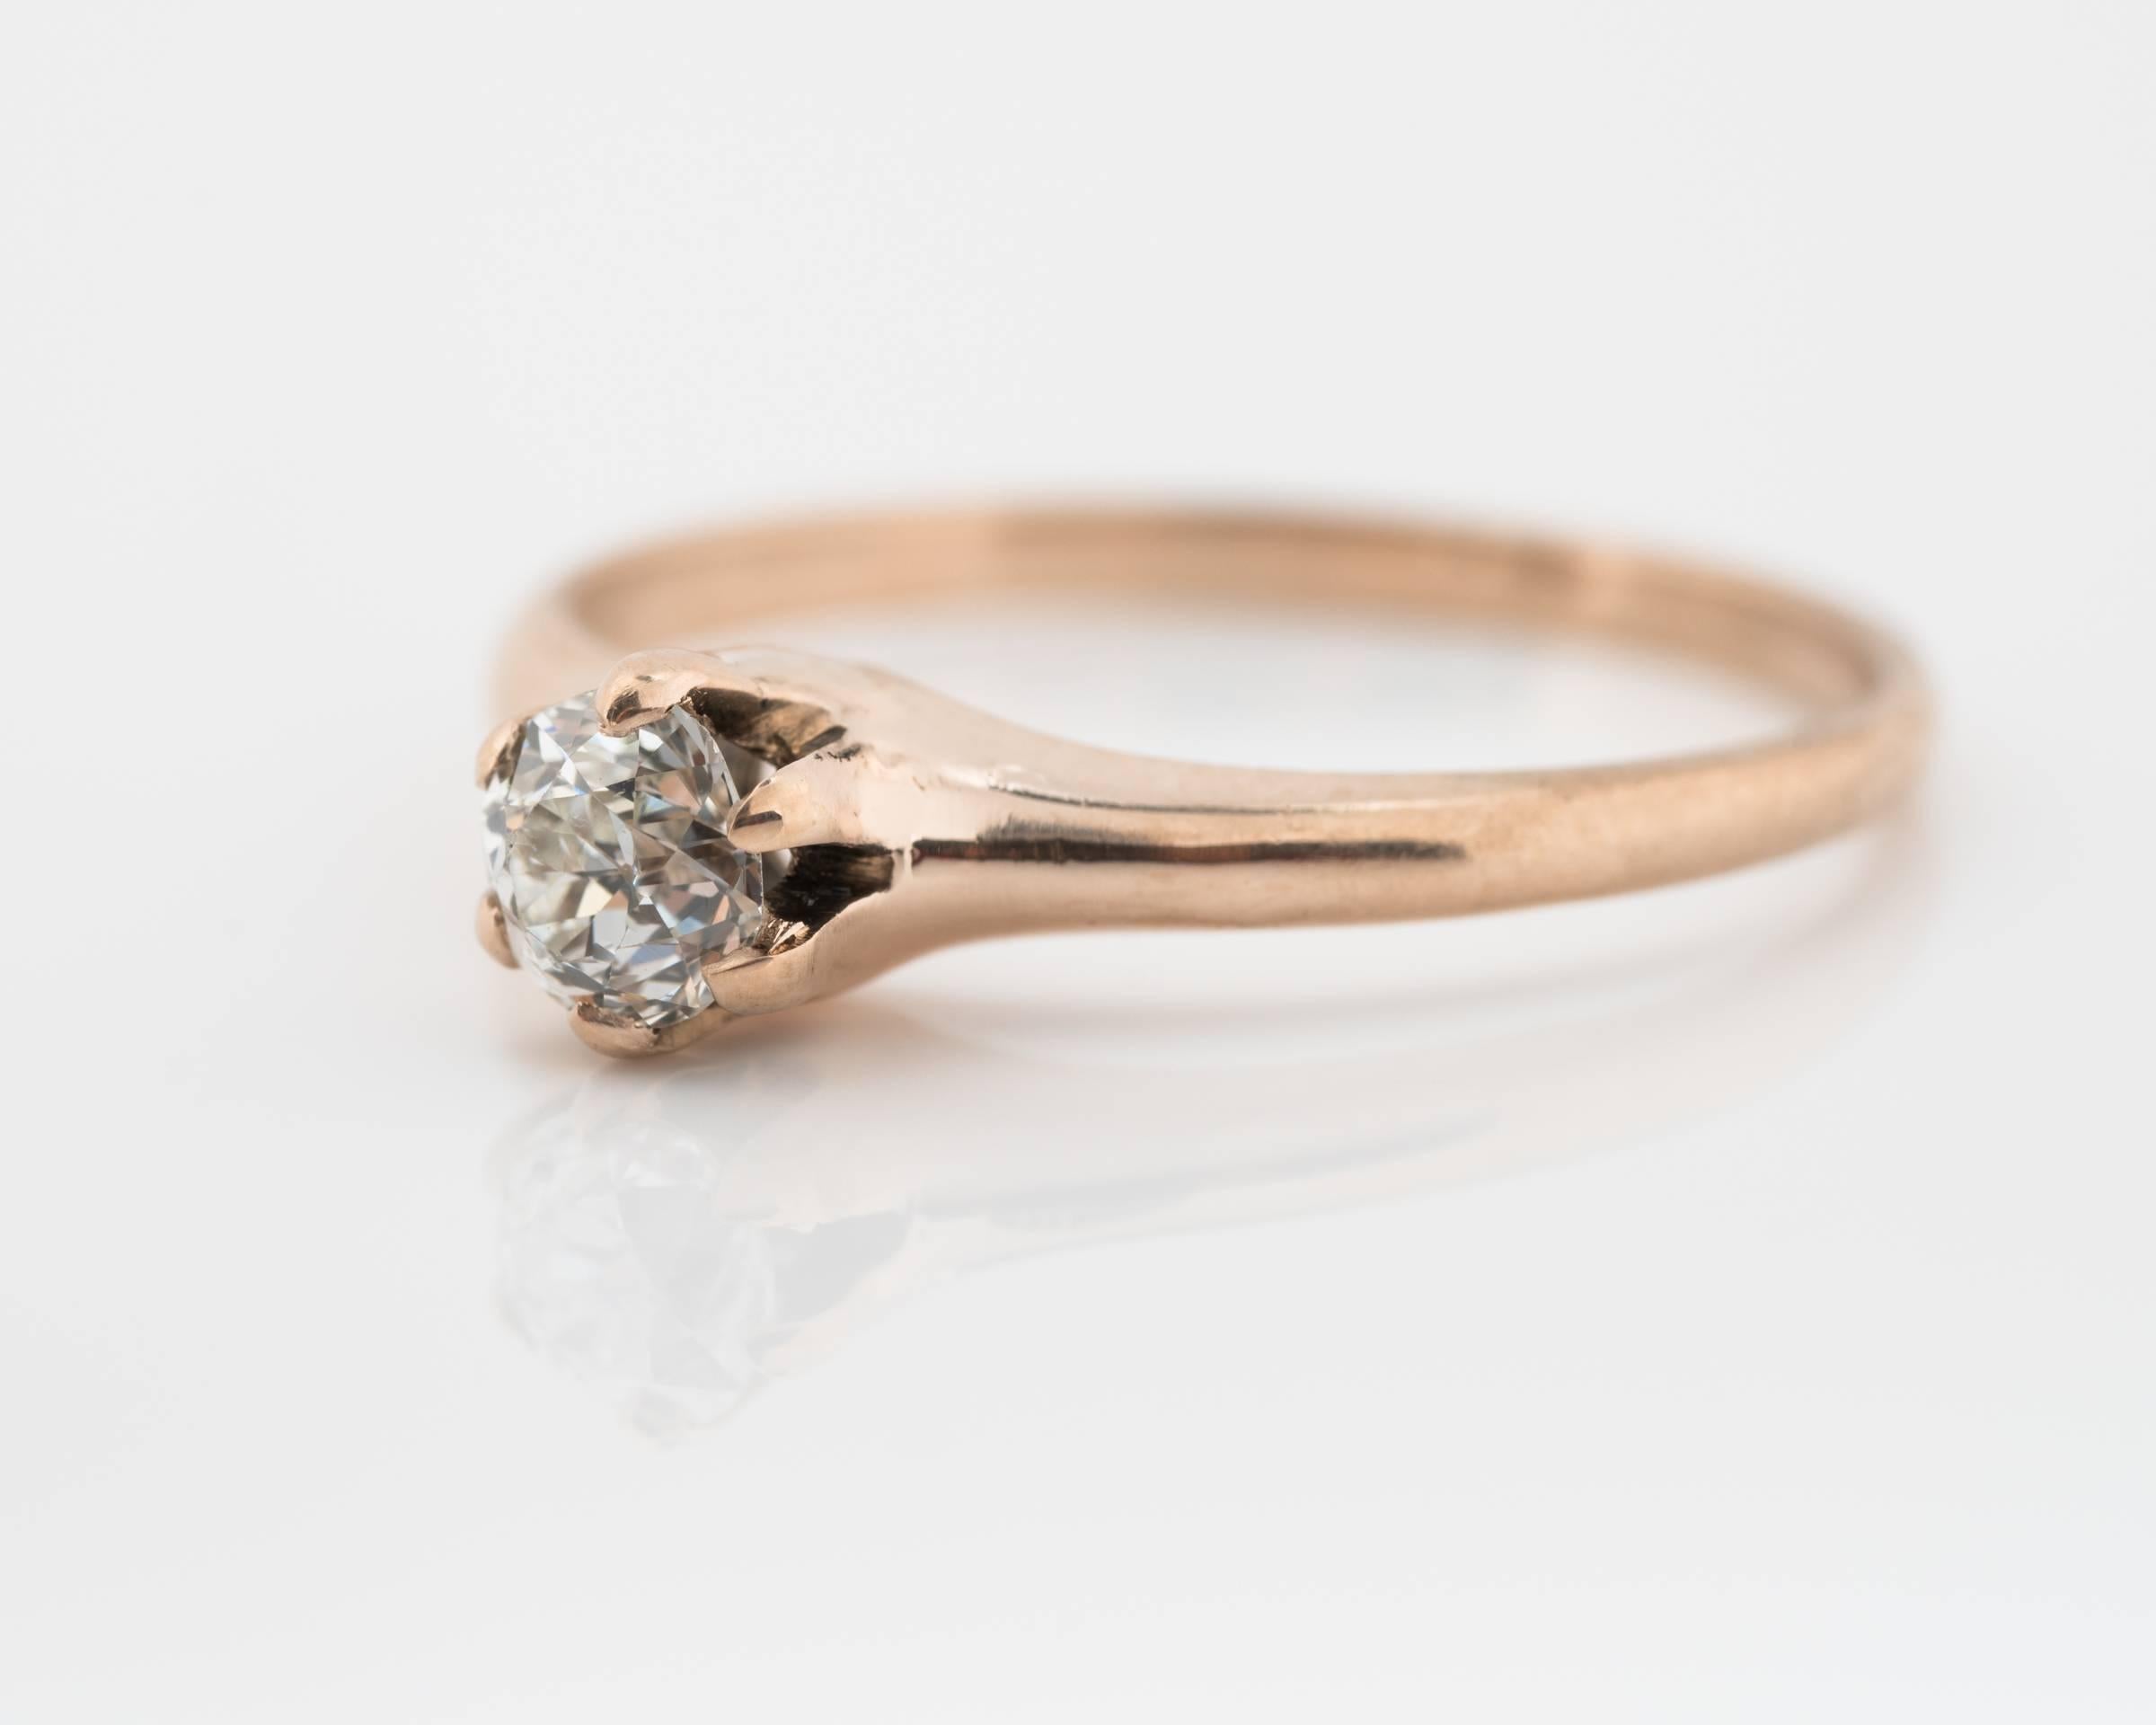 1900s Edwardian .32 Carat Old Miner Diamond 9 Karat Rose Gold Engagement Ring. 
Solitaire style old miner diamond set in 6-prong style
Diamond measures 0.32 carats, old miner cut, H color, SI2 clarity
Mounting crafted in 9 karat rose gold
Fits Ring